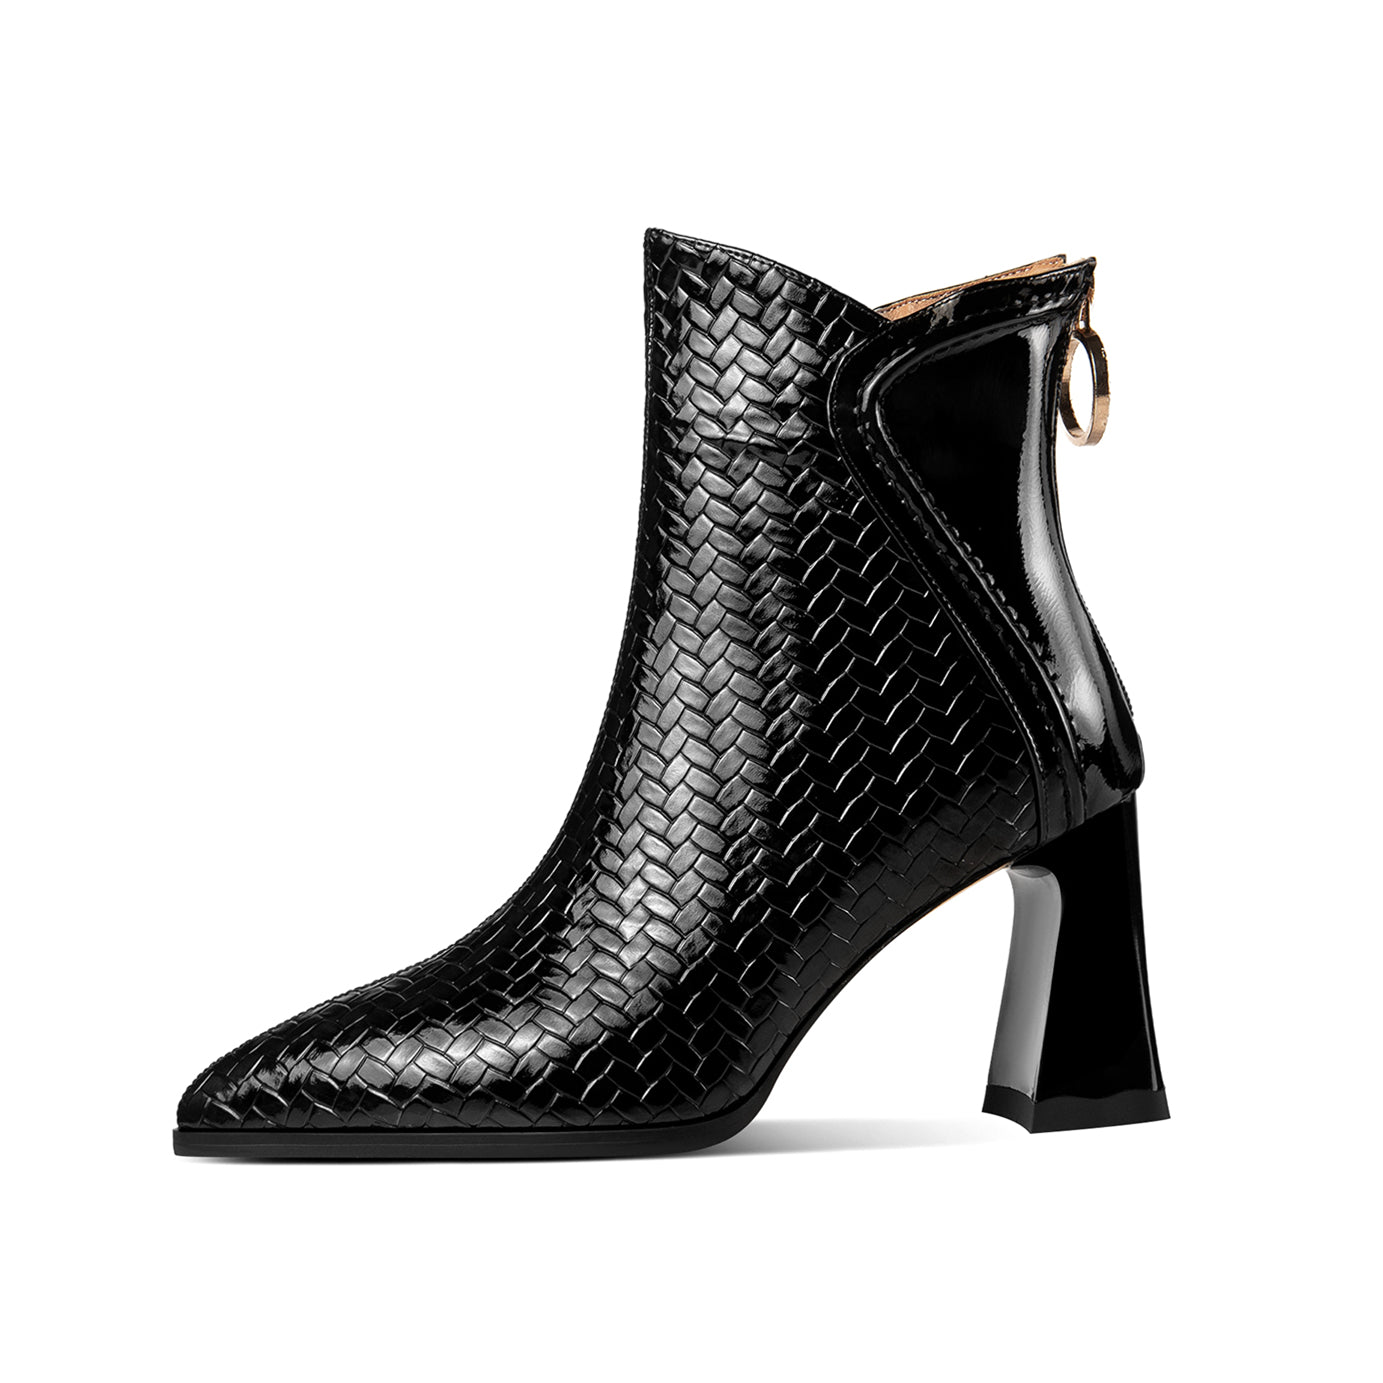 TinaCus Women's Genuine Leather Handmade High Heel Stylish Ring Shaped Zipper Ankle Boots